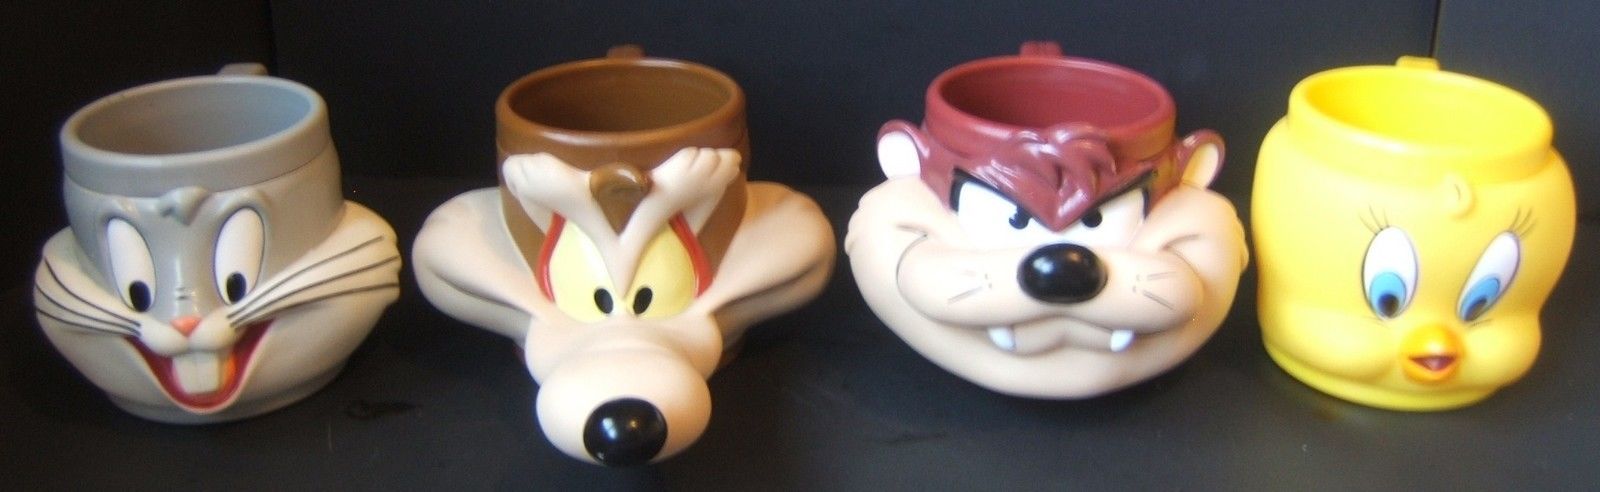 Some Of Your Old Looney Tunes Merchandise Might Actually Be Worth A Small Fortune